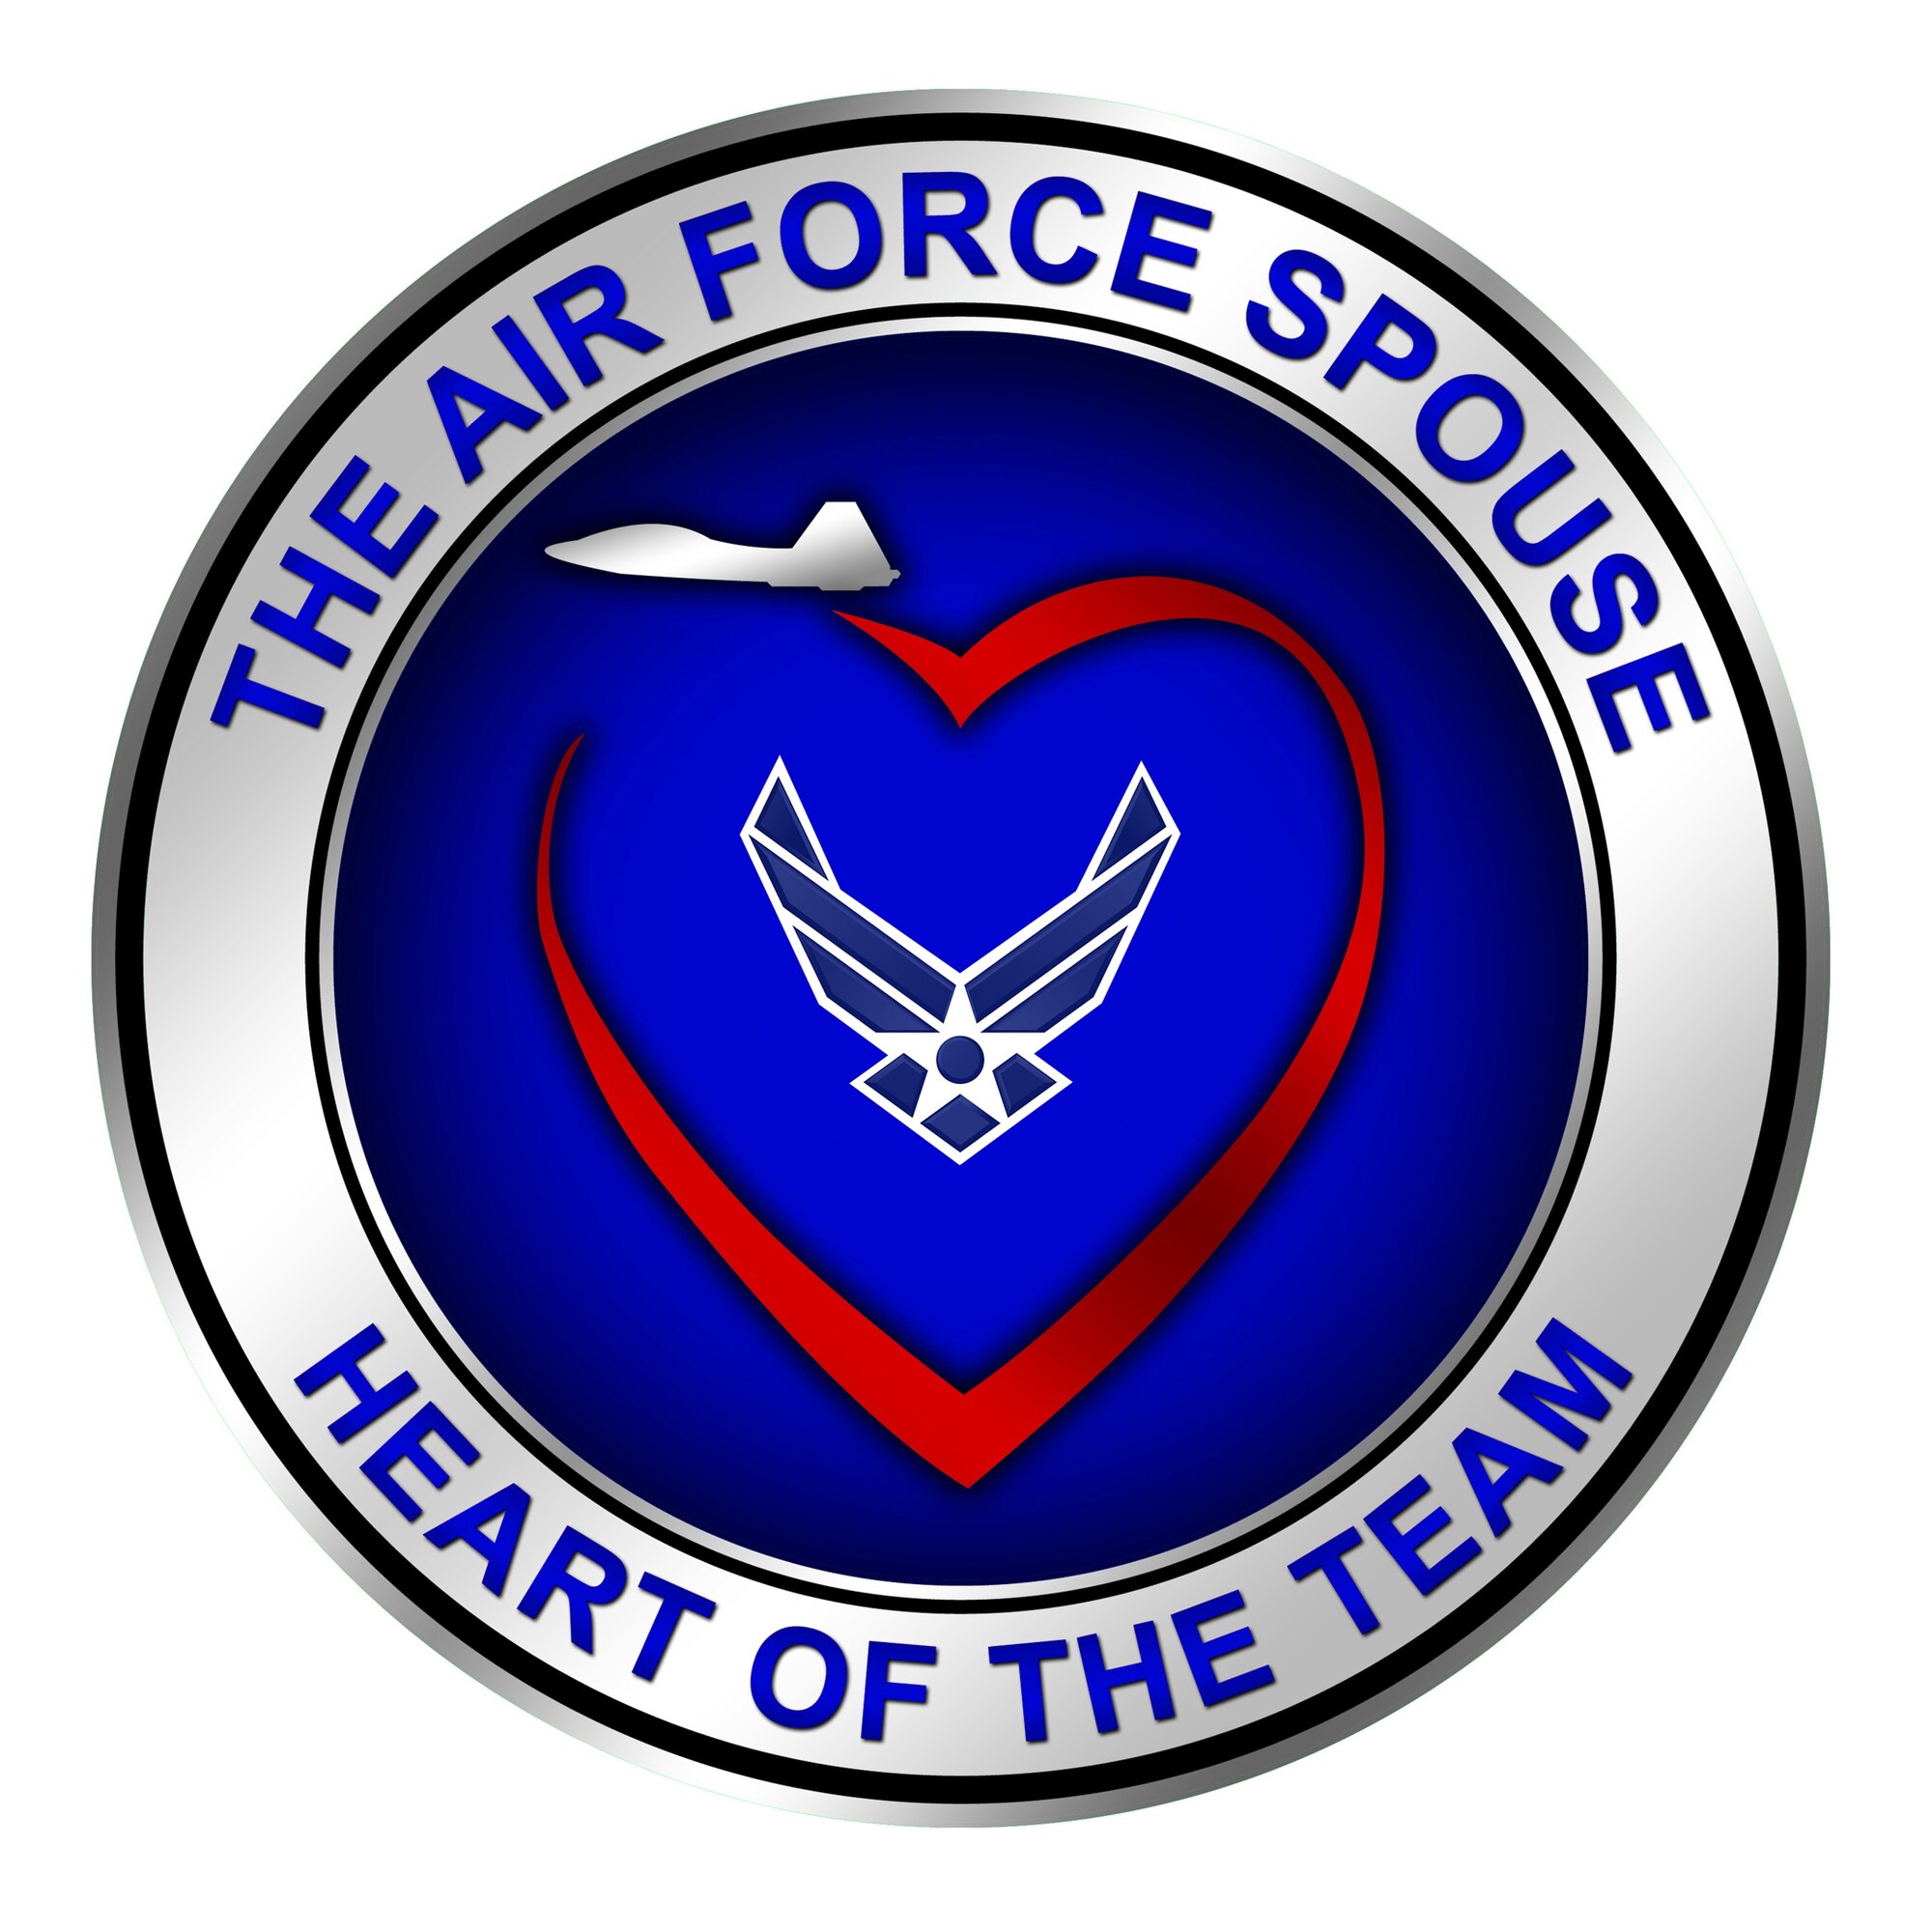 Air Force Spouse Logo (color). Image provided by SrA Edward Carr, Visual Information Specialist, 11WG/PAG. Image is 7x7 inches @ 300 ppi.